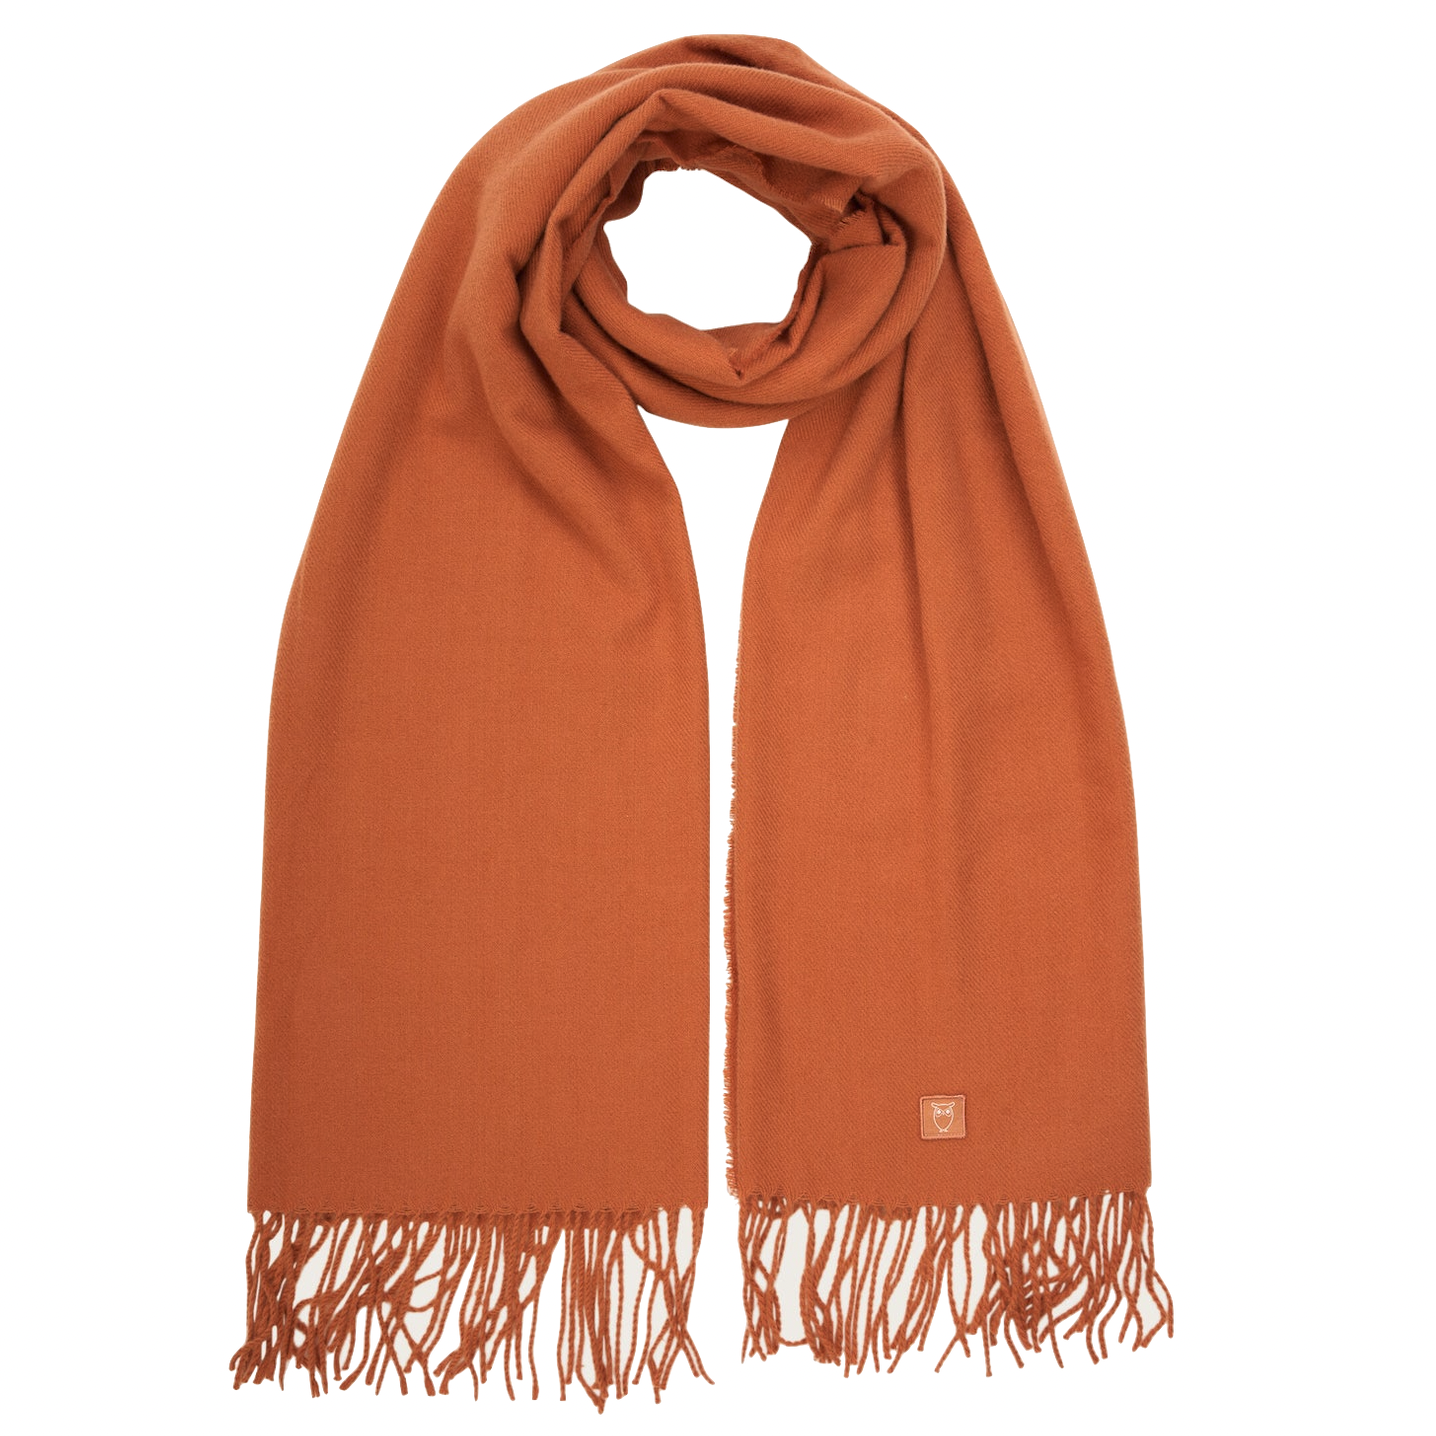 KnowledgeCotton Apparel KnowledgeCotton, Solid Woven Scarf, autumn leaf